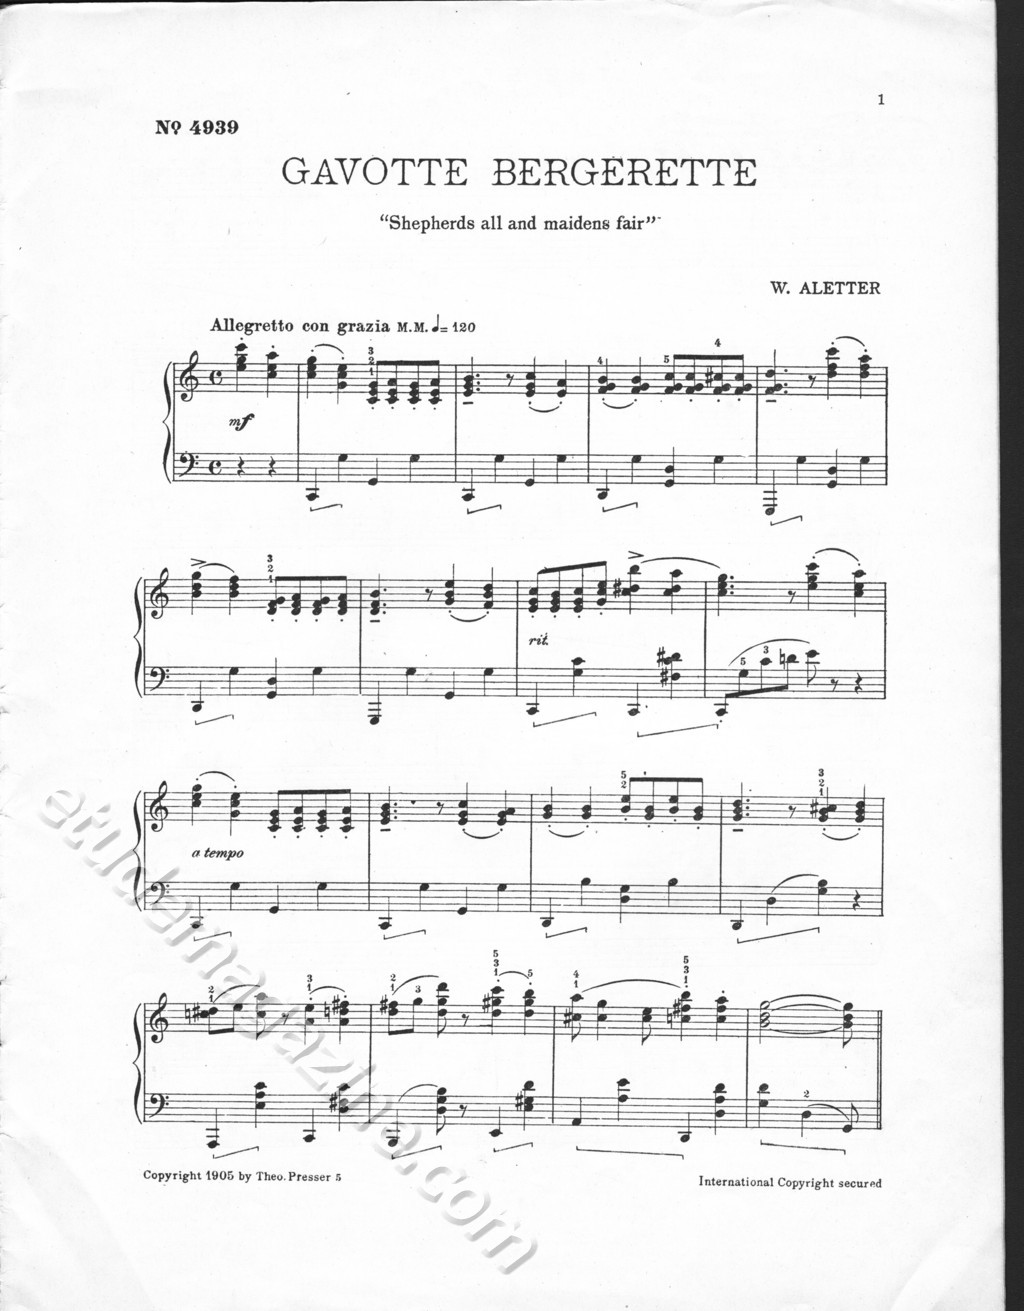 Gavotte Bergerette "Shepherds all and maidens fair". W. Aletter.